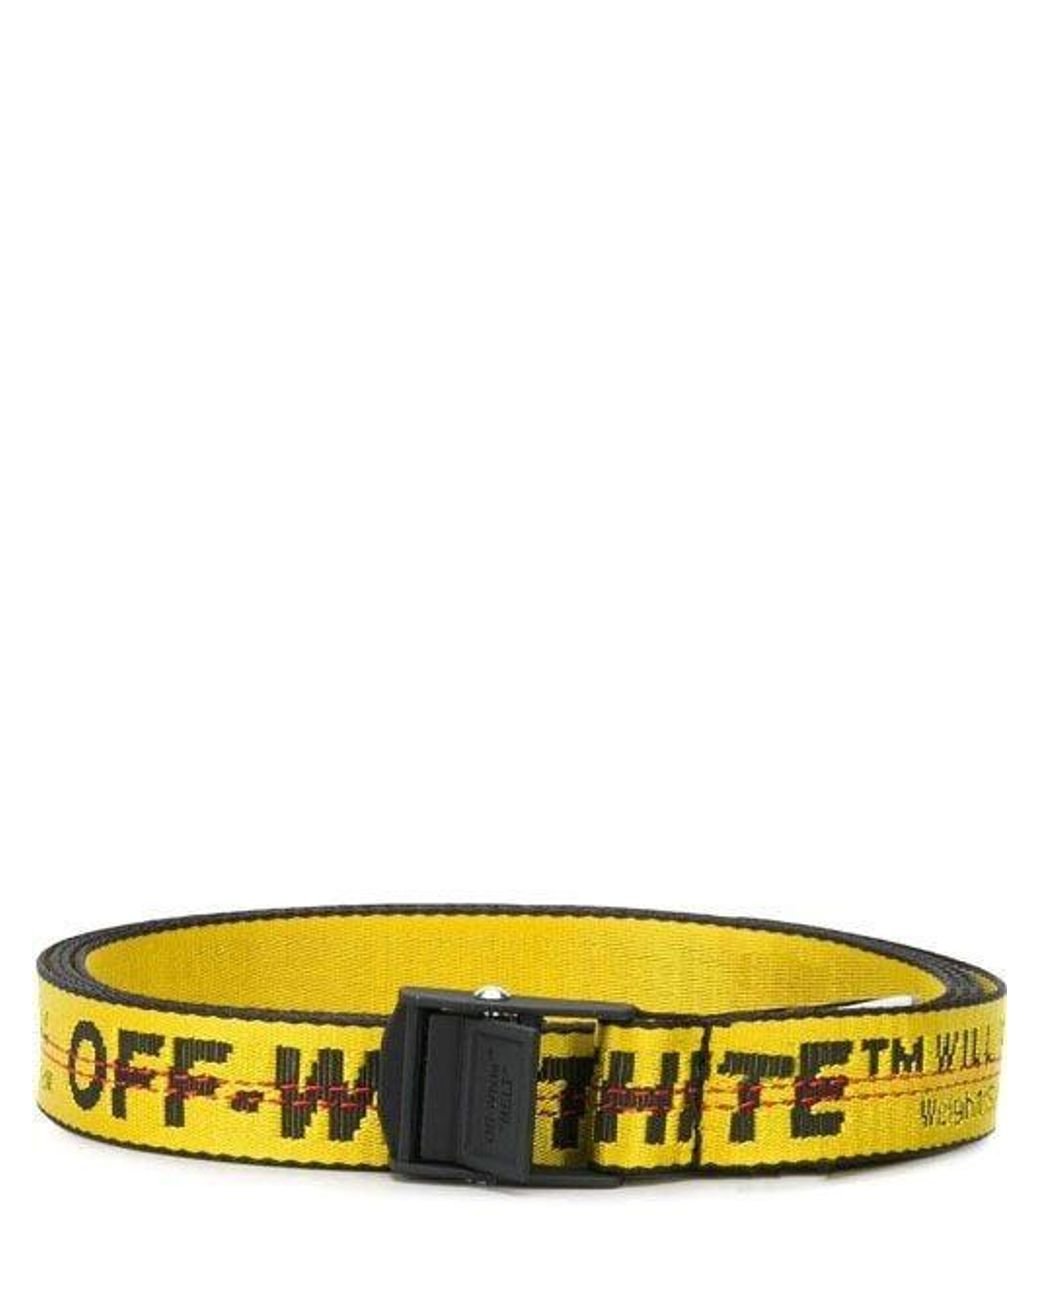 Off-White c/o Virgil Abloh Synthetic Yellow Mini Industrial Belt - Lyst